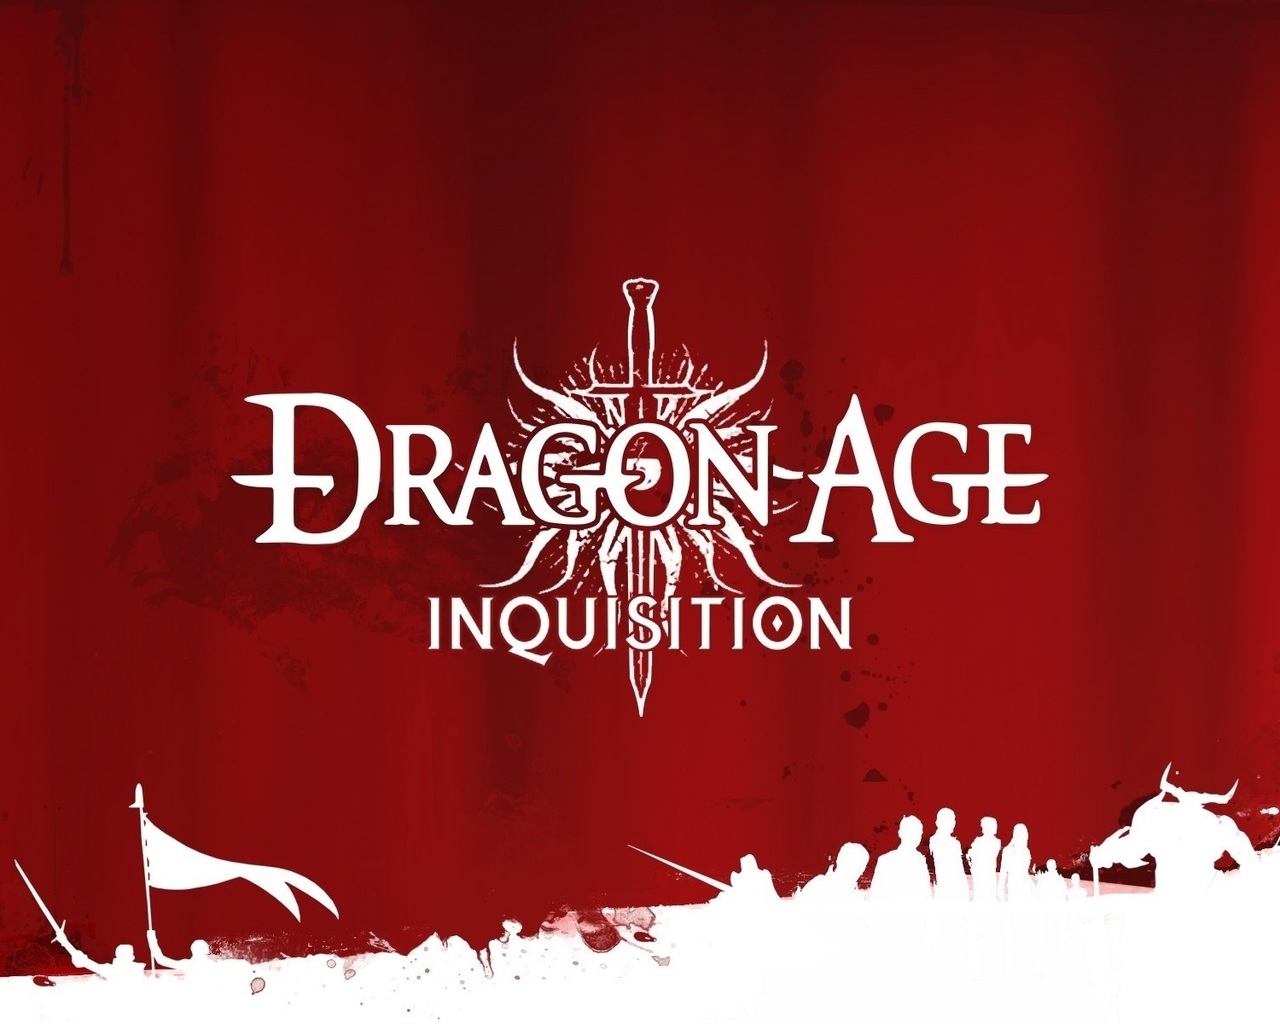 Dragon Age Inquisition Game Poster  for 1280 x 1024 resolution